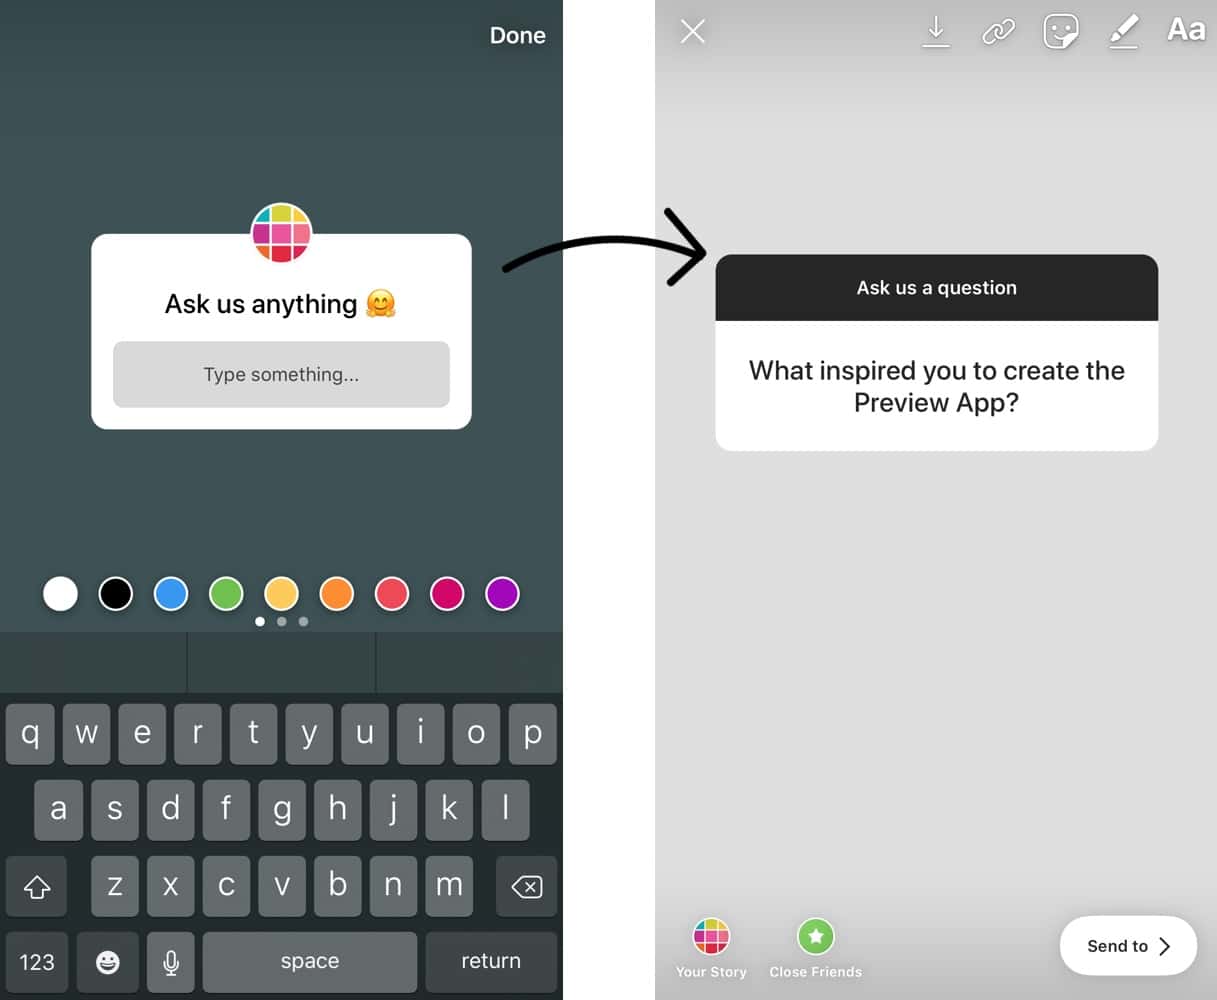 Download How To Use The Question Feature In Insta Story Tutorial Tricks Ideas Preview App